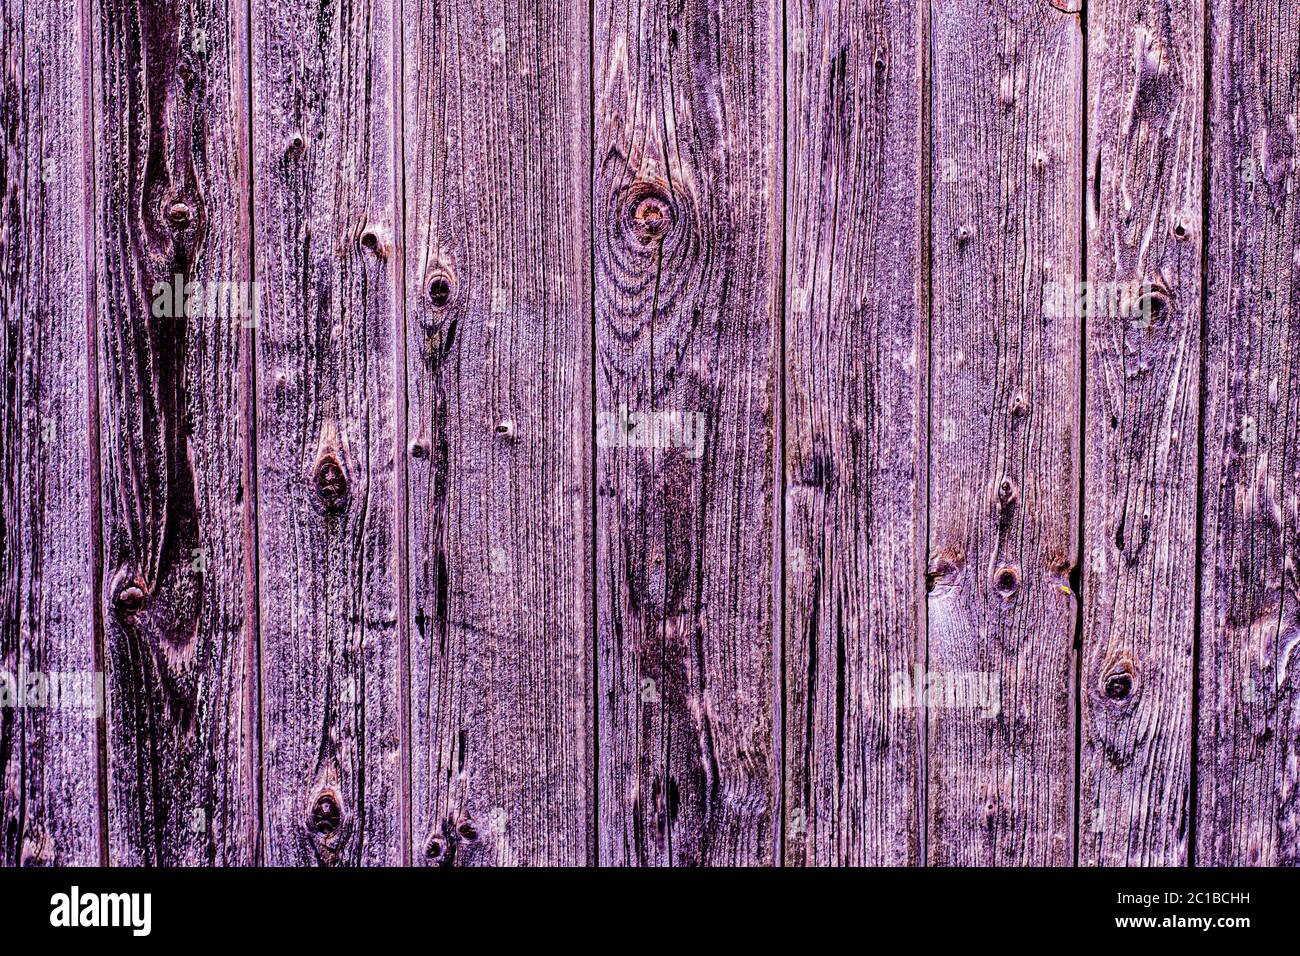 Violet or purple wooden weathered planks texture for background Stock Photo  - Alamy